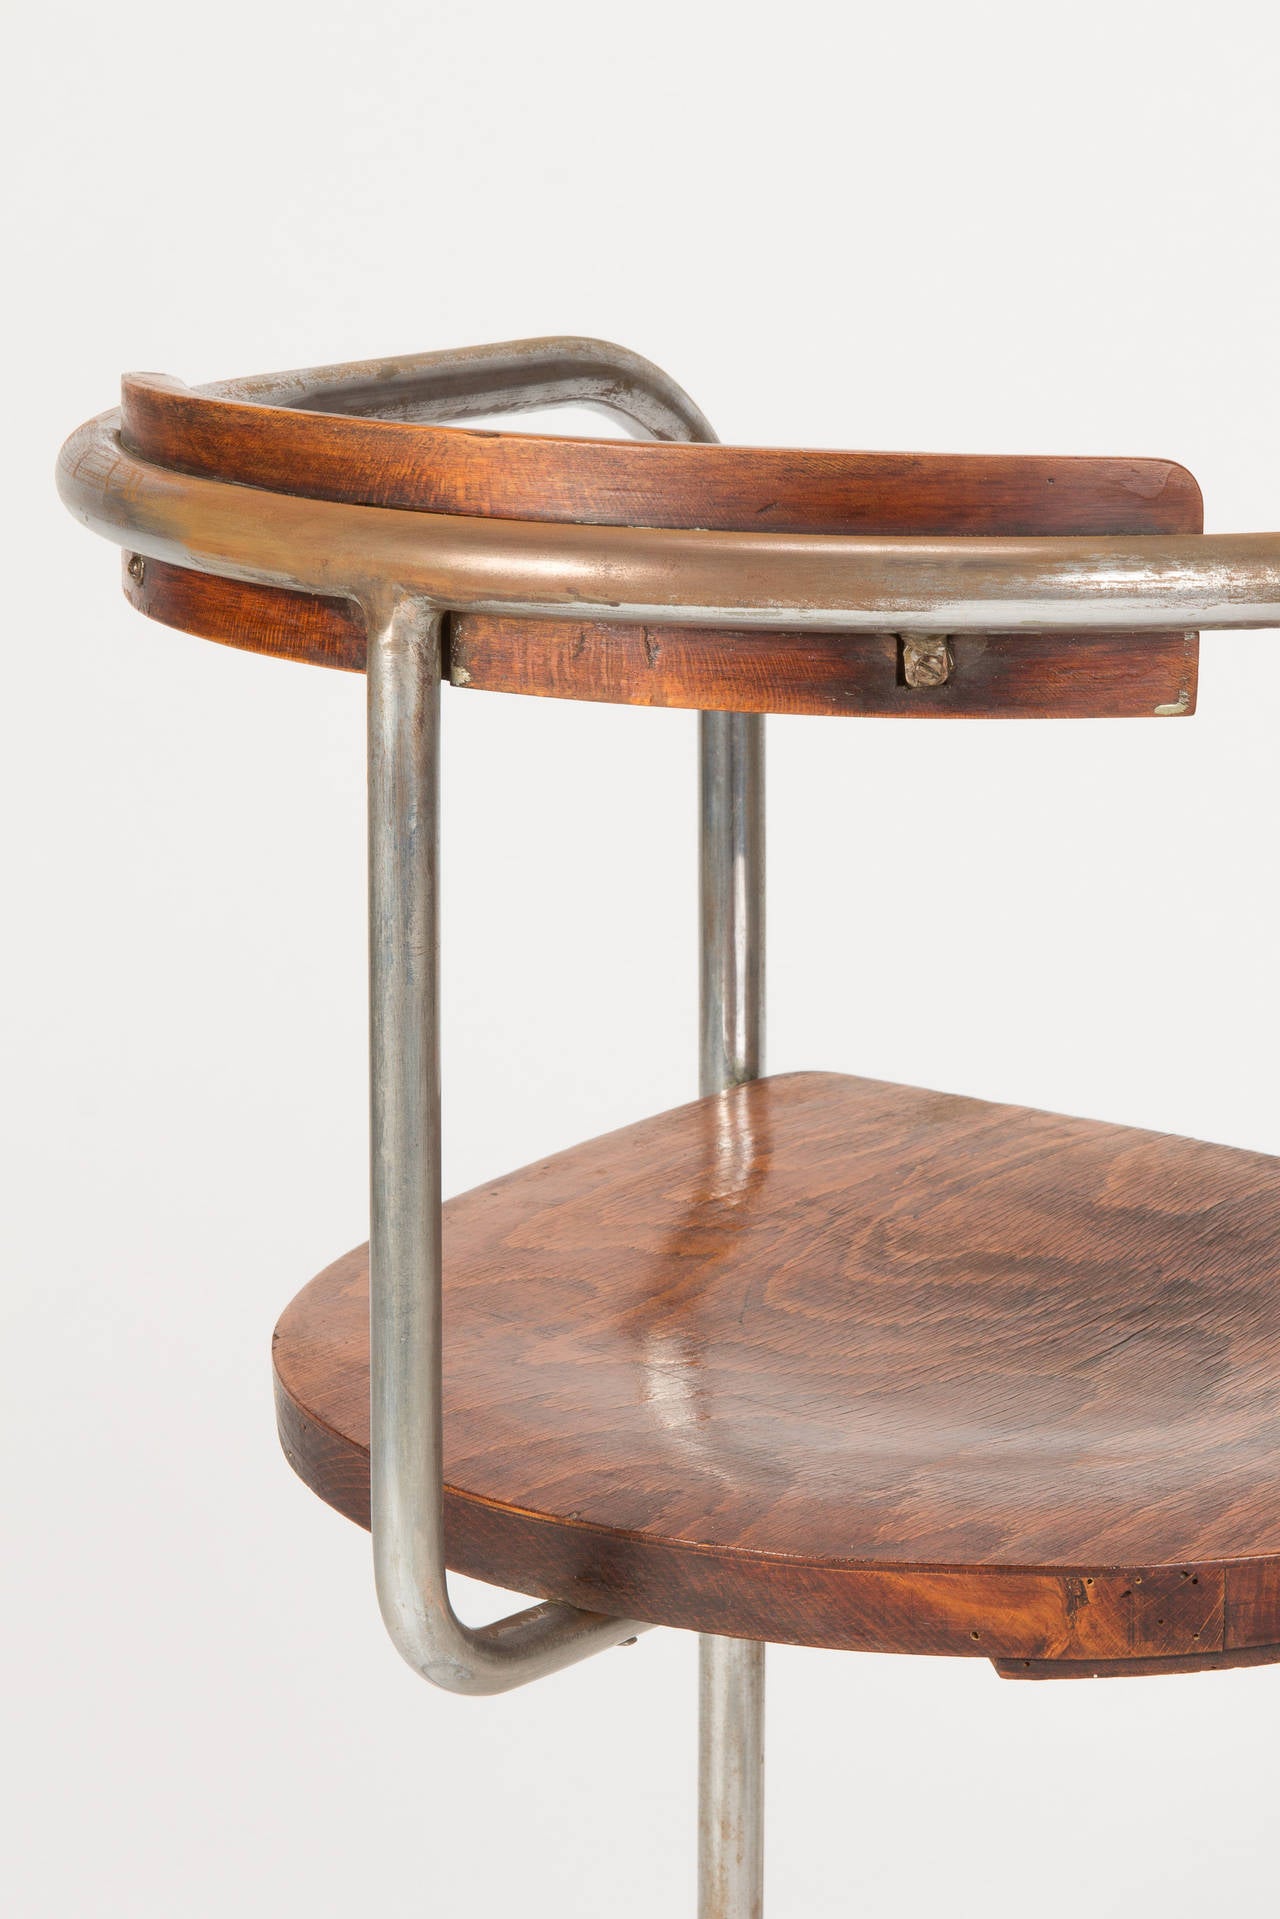 Lacquered Antique Bauhaus Steel Tube Cantilever Chair, Italy, 1930s For Sale